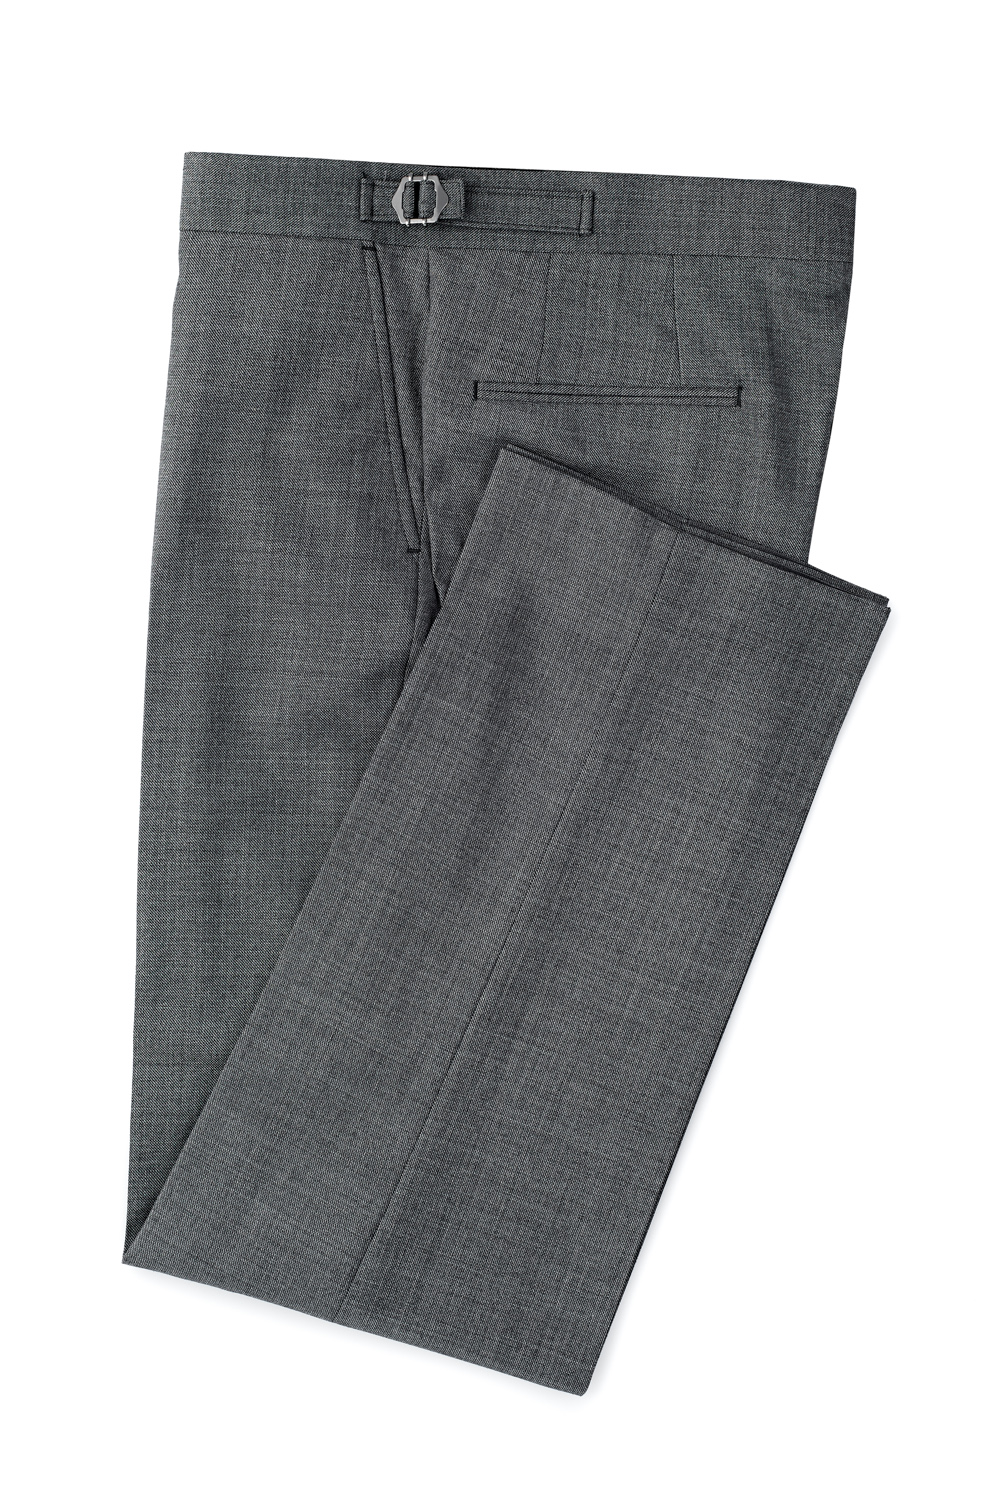 Classic grey and black traditional stripe flat fronted morning trousers